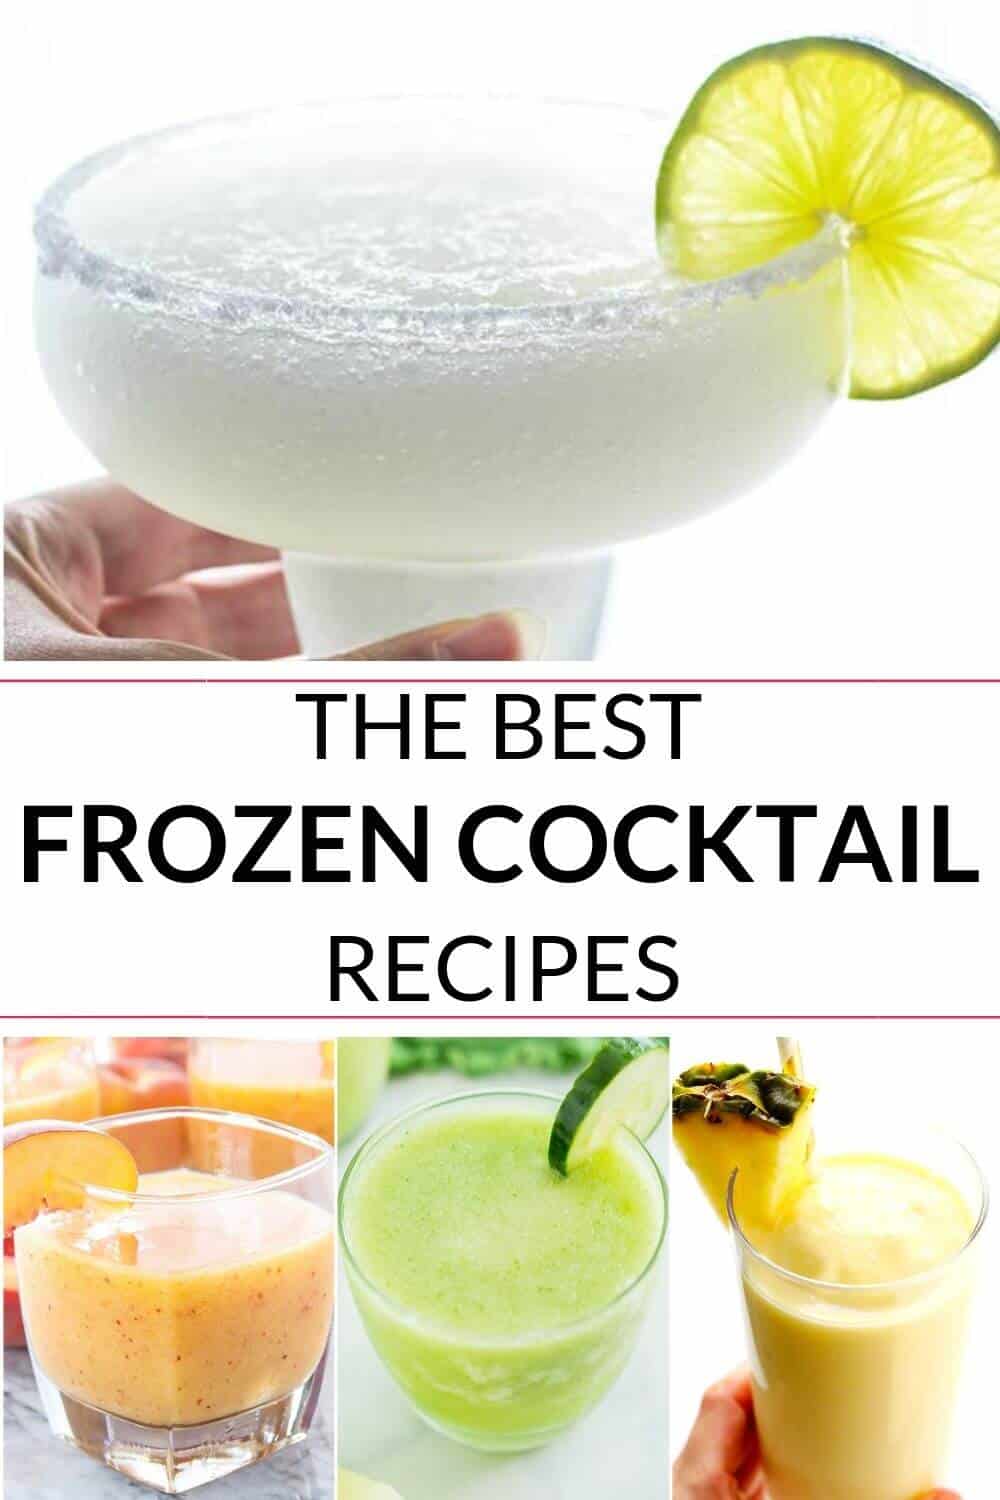 Collection of frozen drinks and cocktails